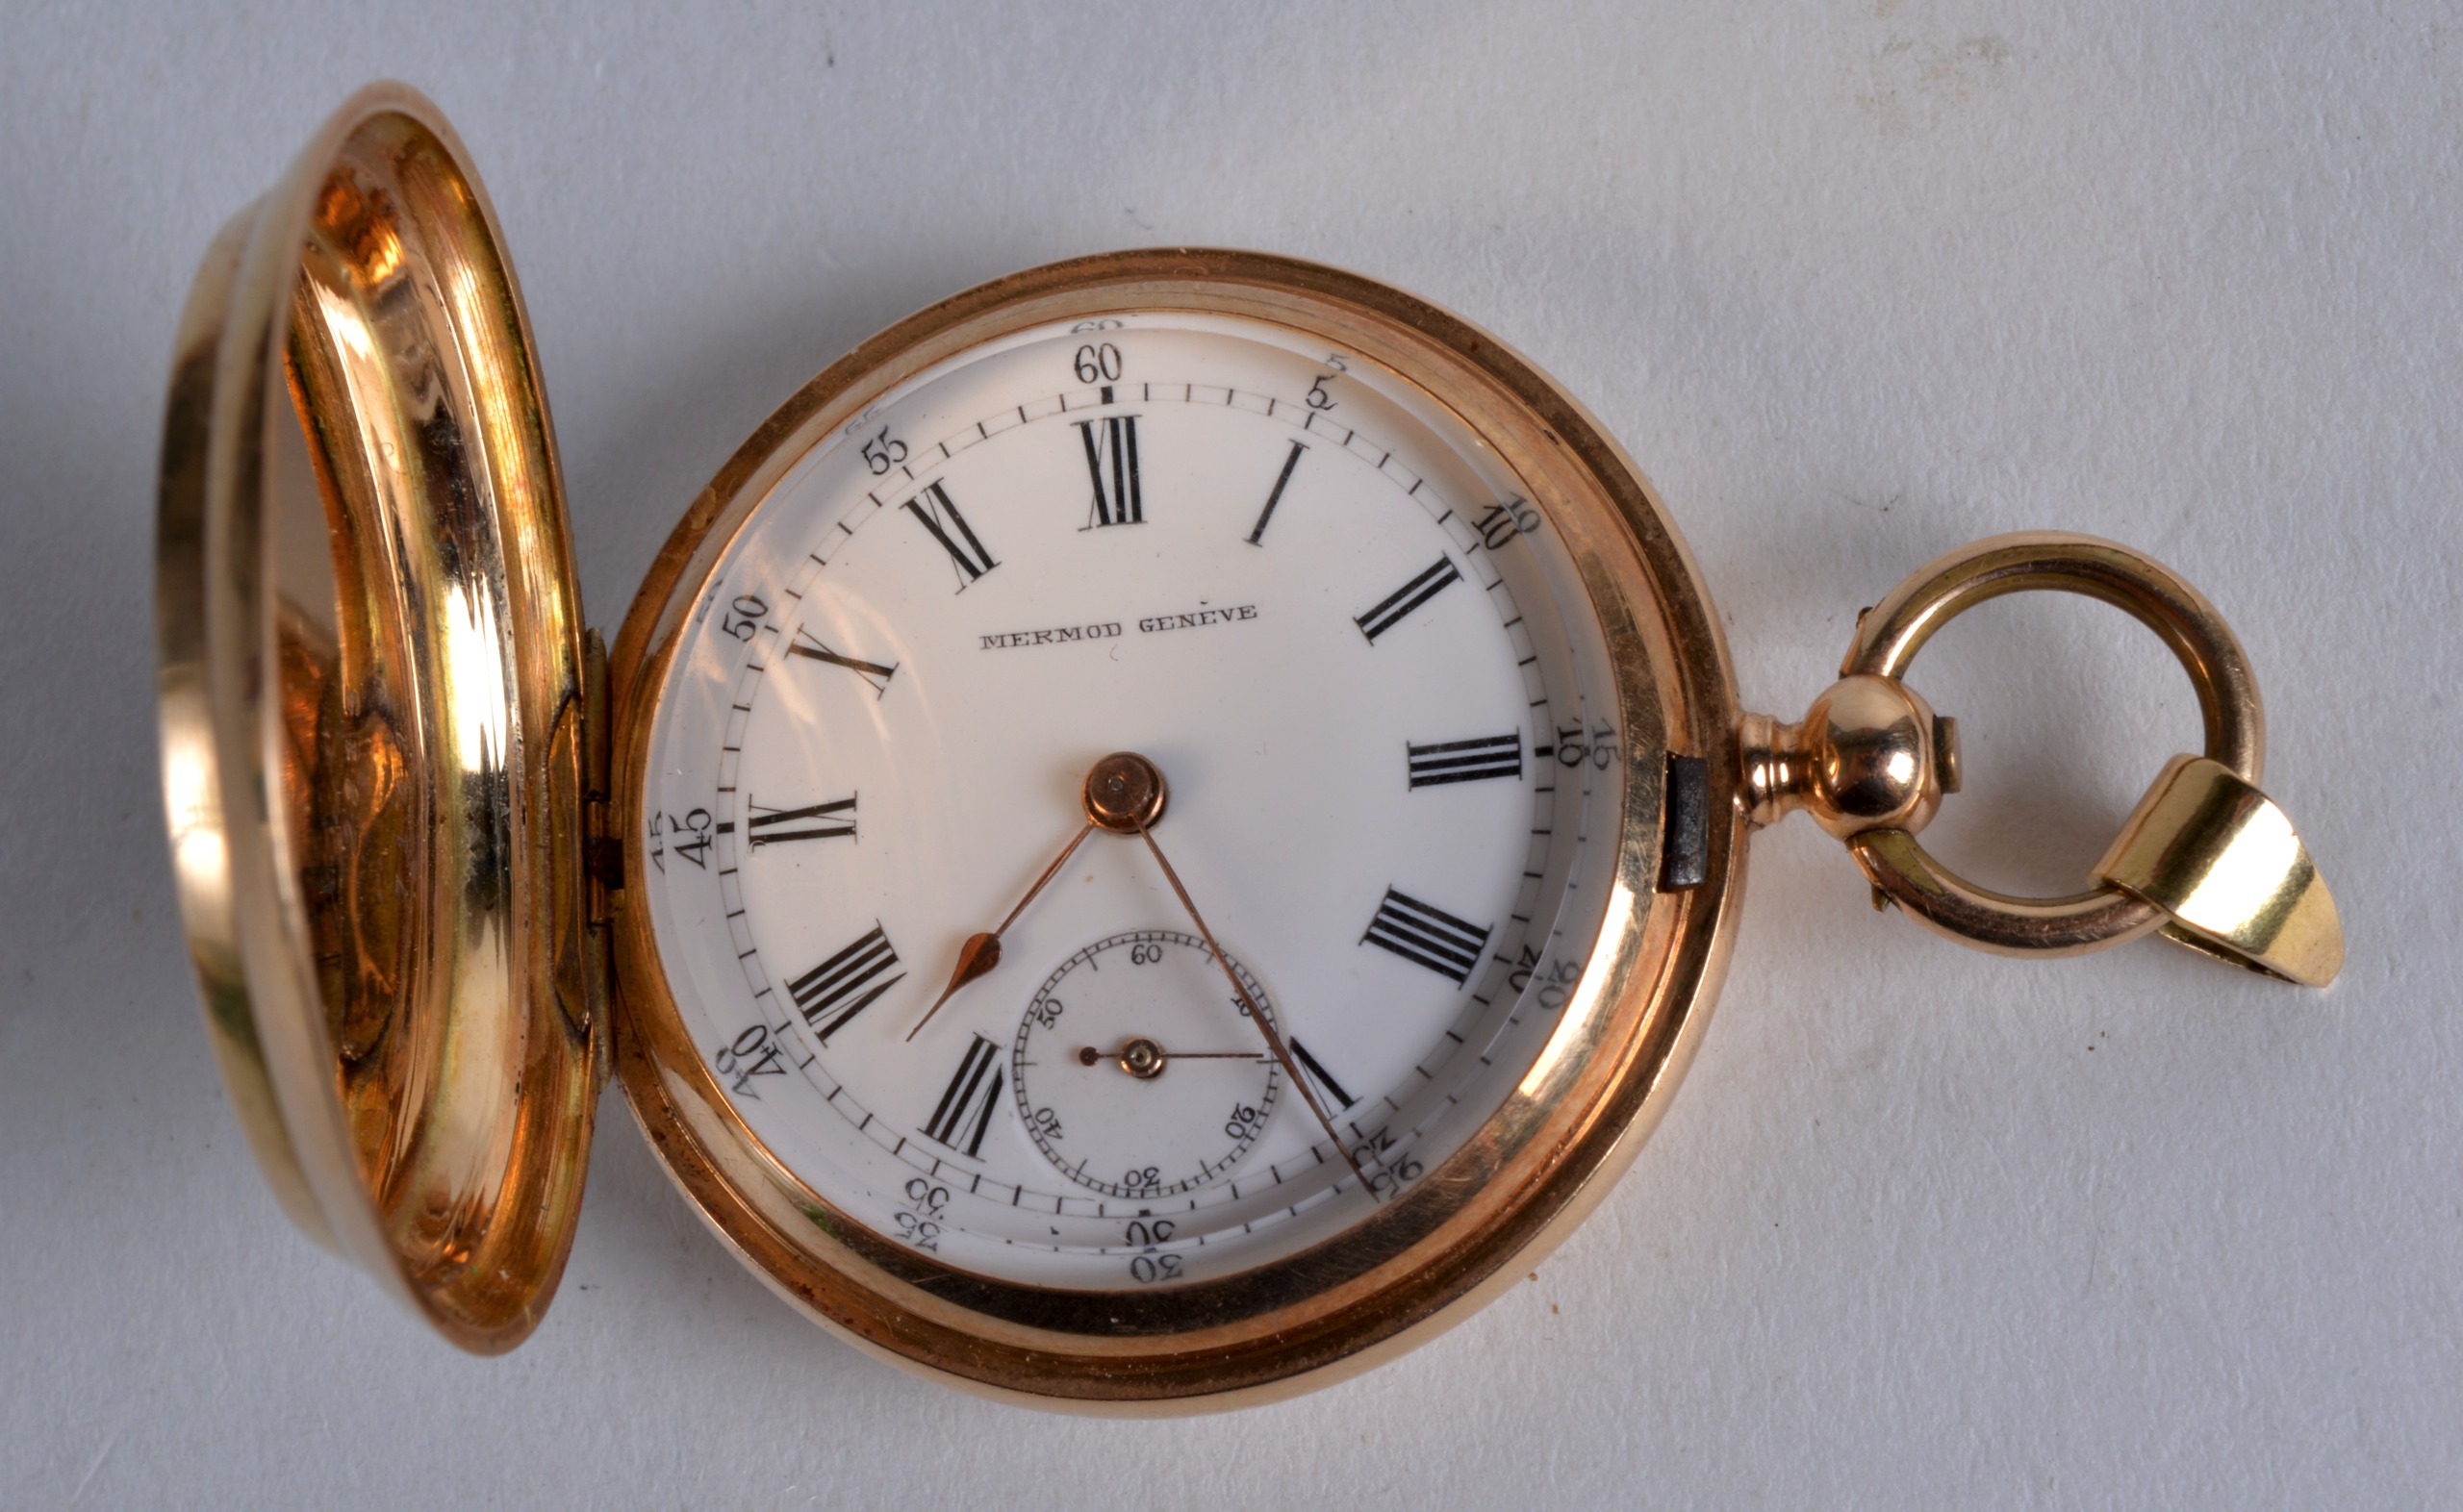 A FINE EARLY 20TH CENTURY 9CT GOLD AND ENAMEL VIENNA LADIES WATCH in a fitted case, wonderfully - Image 3 of 5